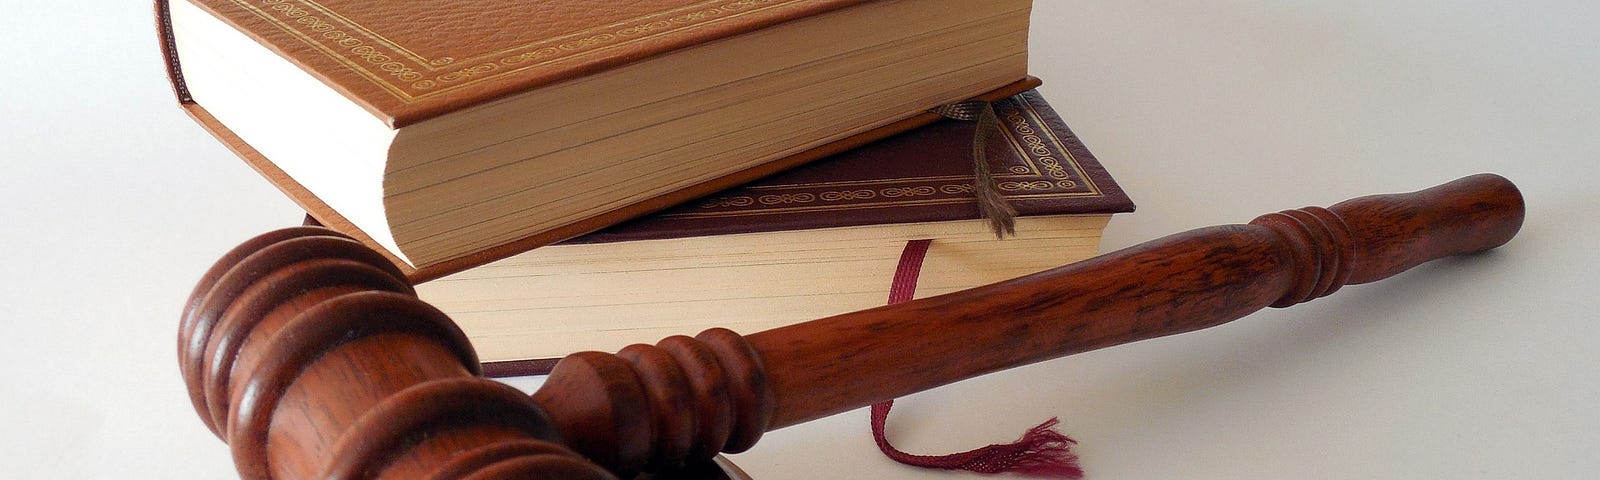 A wooden gavel and sound block are shown at the bottom of the image. Two books with gold leaf designs on their covers are stacked behind the gavel.